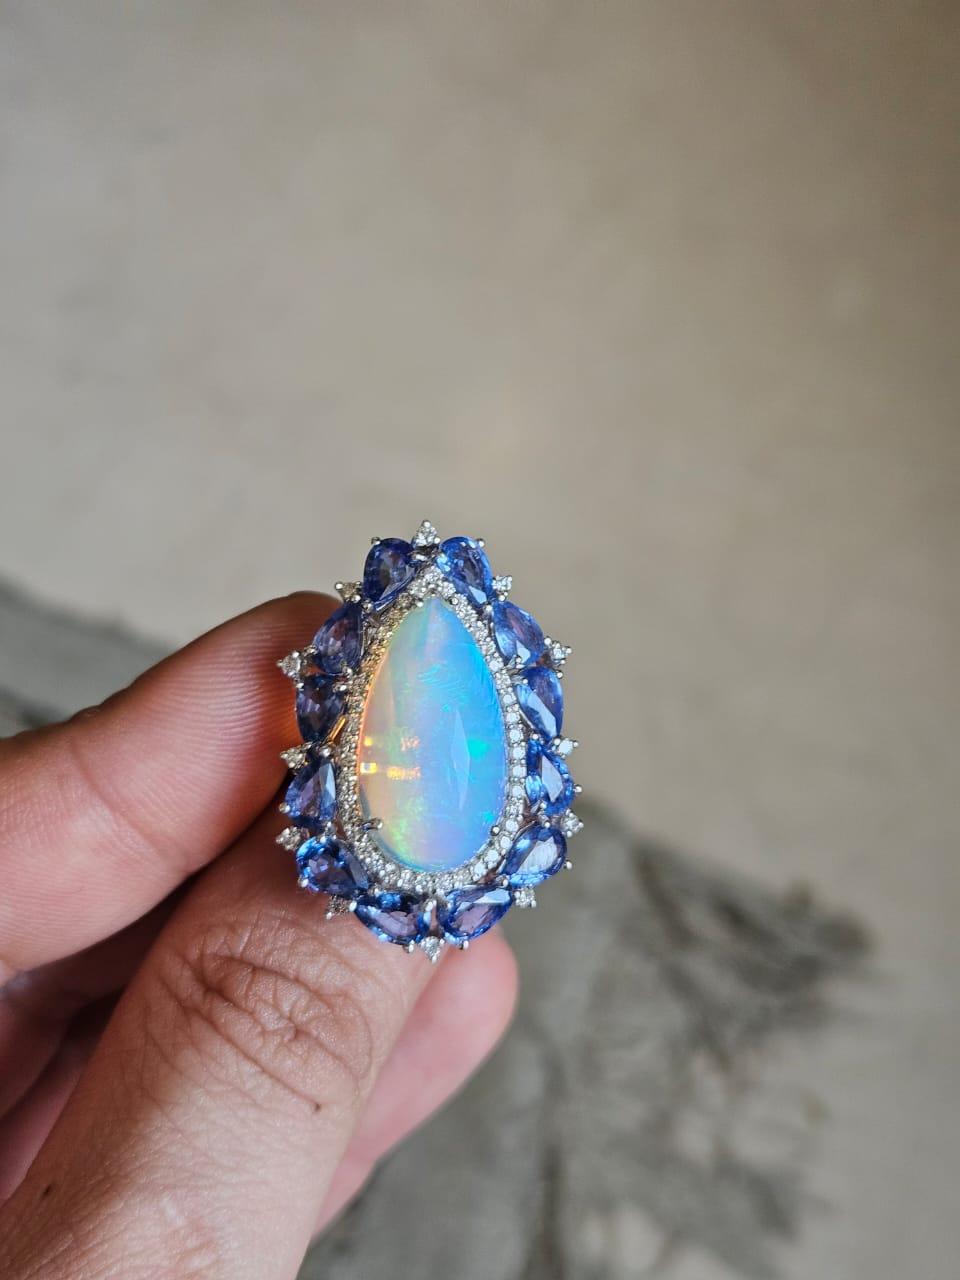 A very gorgeous and beautiful, Ethiopian Opal & Blue Sapphires Cocktail Ring set in 18K White Gold & Diamonds. The weight of the pear shaped cabochon Opal is 6.67 carats. The Opal is of Ethiopian origin and has an blue - green play of colour. The